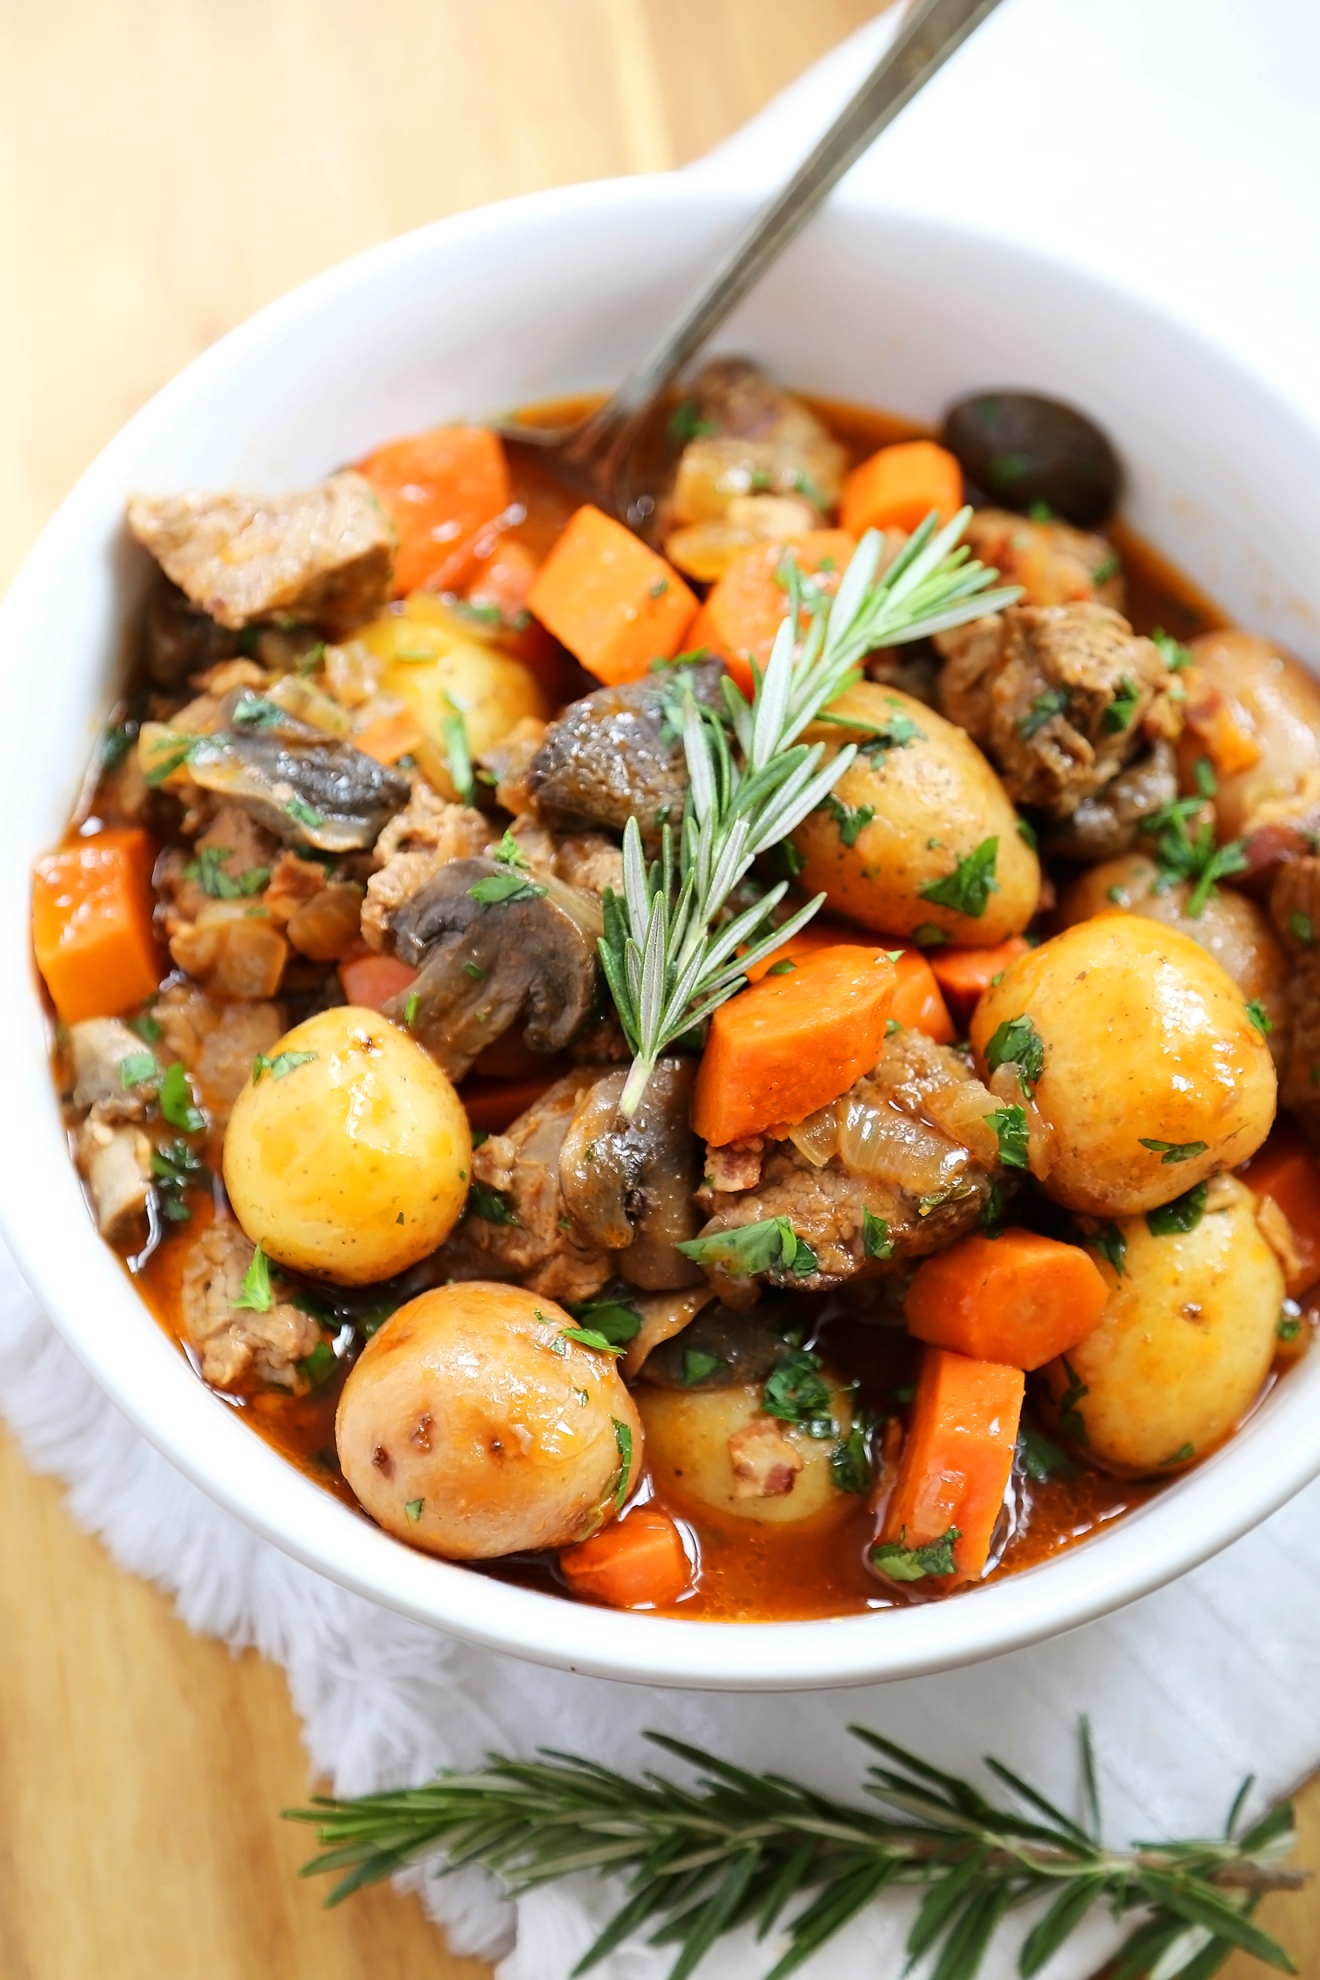 Slow Cooker Beef Bourguignon - Hearty veggies meet juicy, tender beef in this classic French stew. Thecomfortofcooking.com